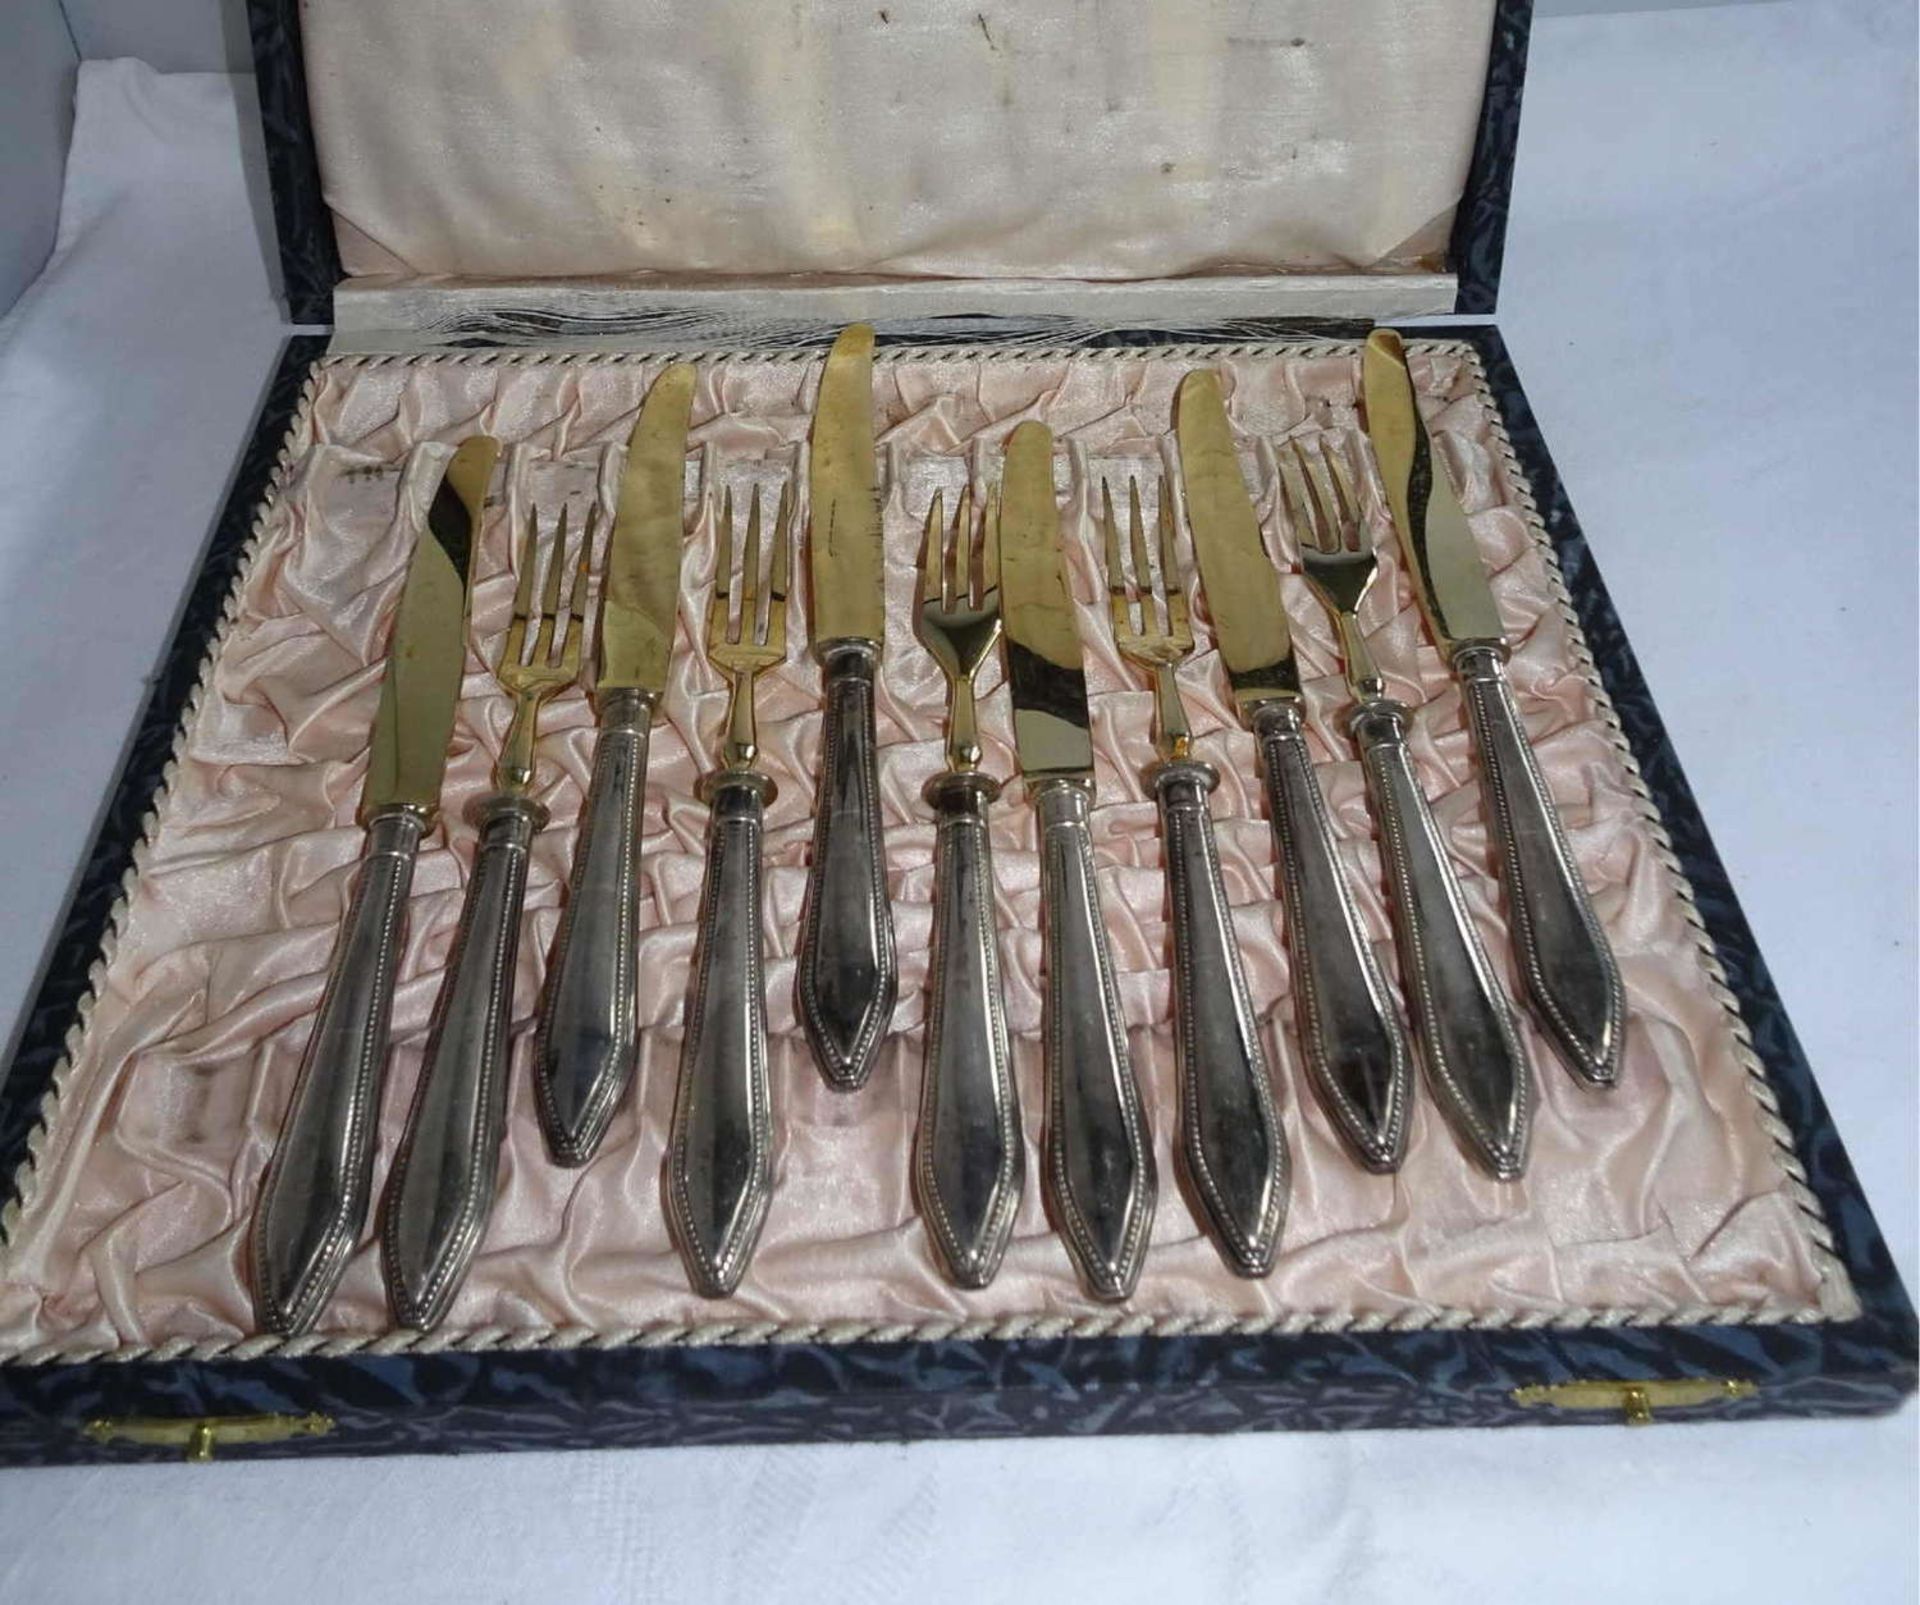 Silver cutlery in the box (1 fork missing). A total of 6 knives and 5 forks.Silberbesteck im